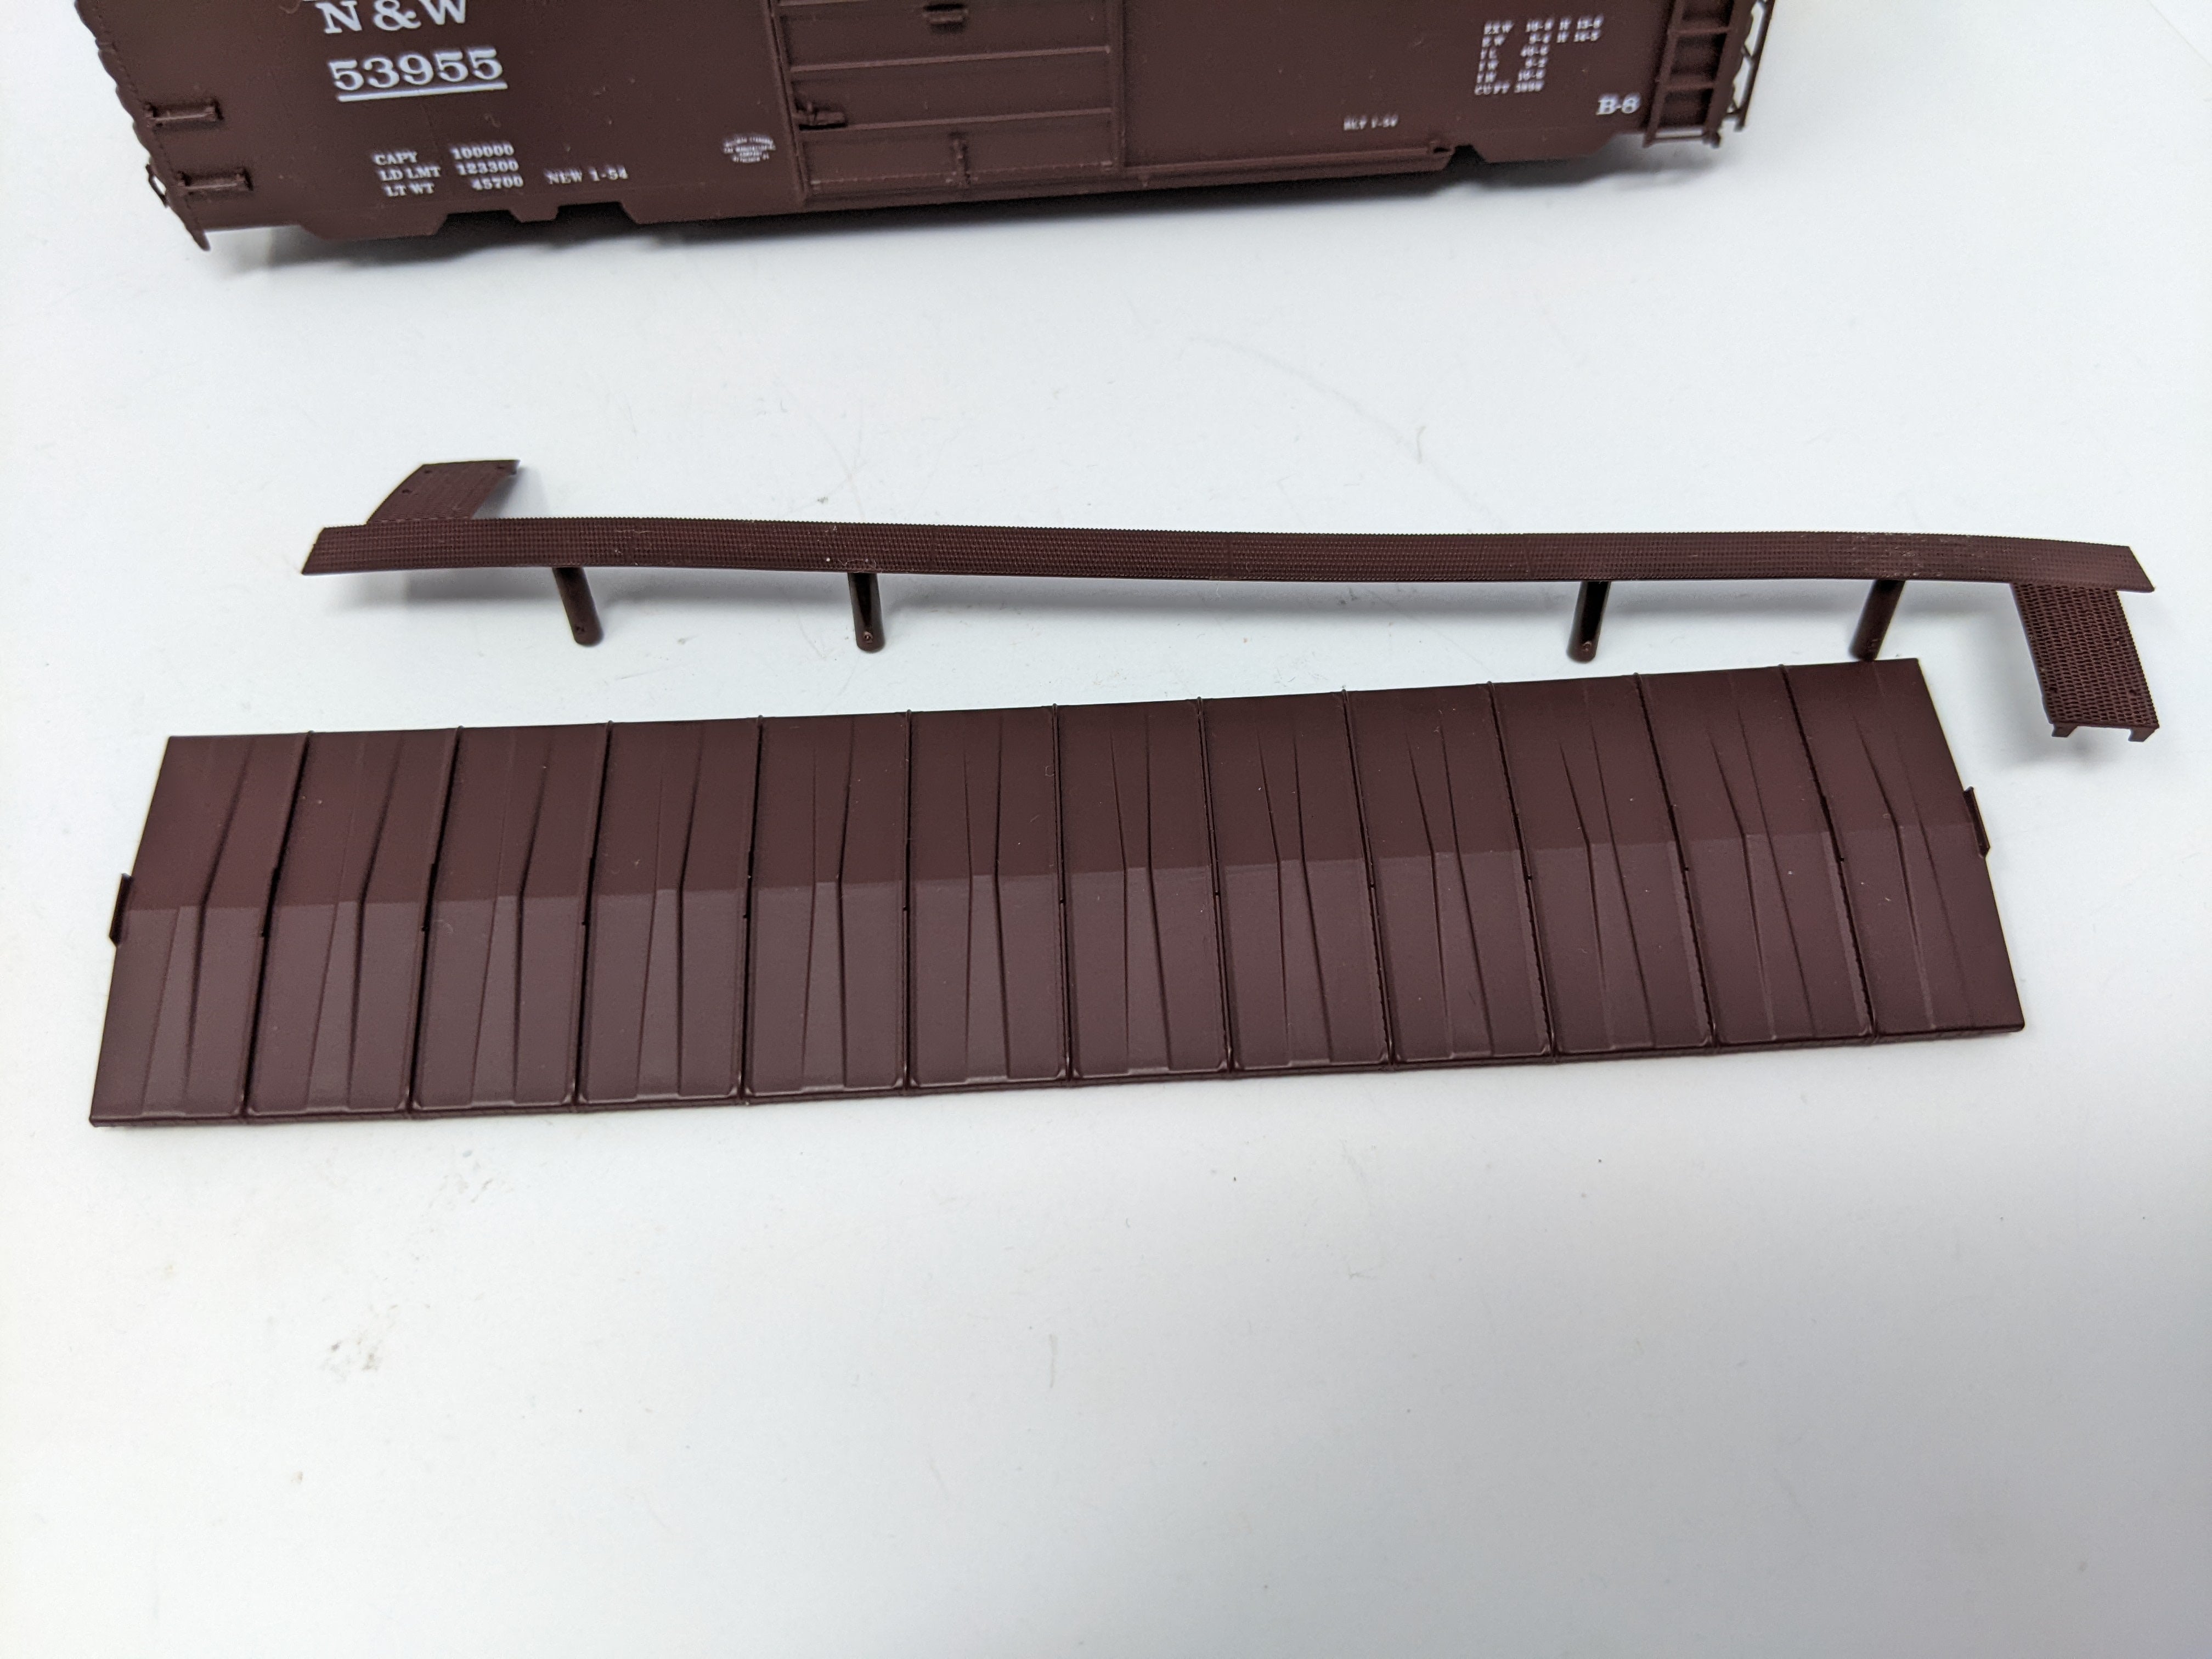 USED Intermountain HO Scale, PS-1 40' Box Car (partially built and incomplete), Norfolk & Western N&W #53955, Read Description